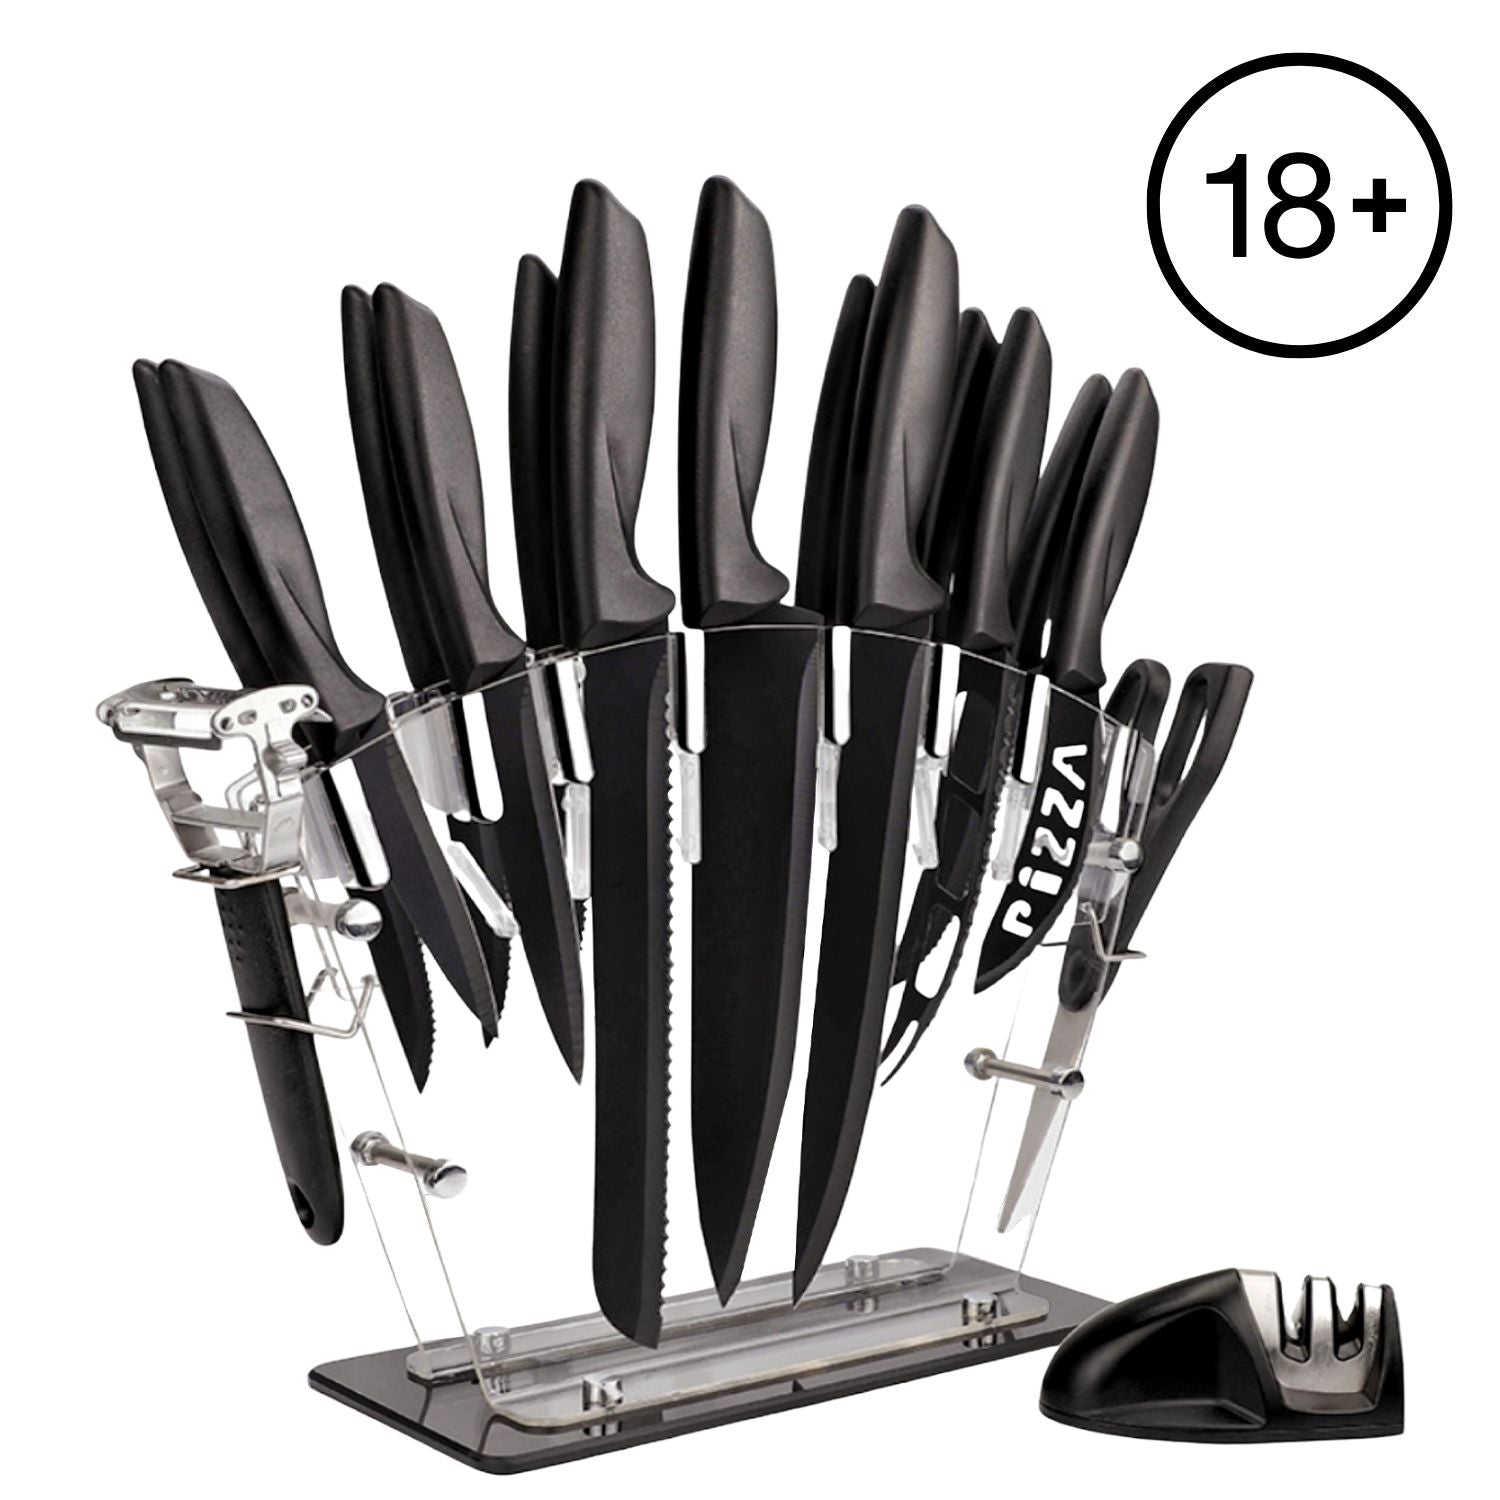 GOMINIMO 17 Piece Kitchen Knife Set with Acrylic Knife Block (Black and Transparent)